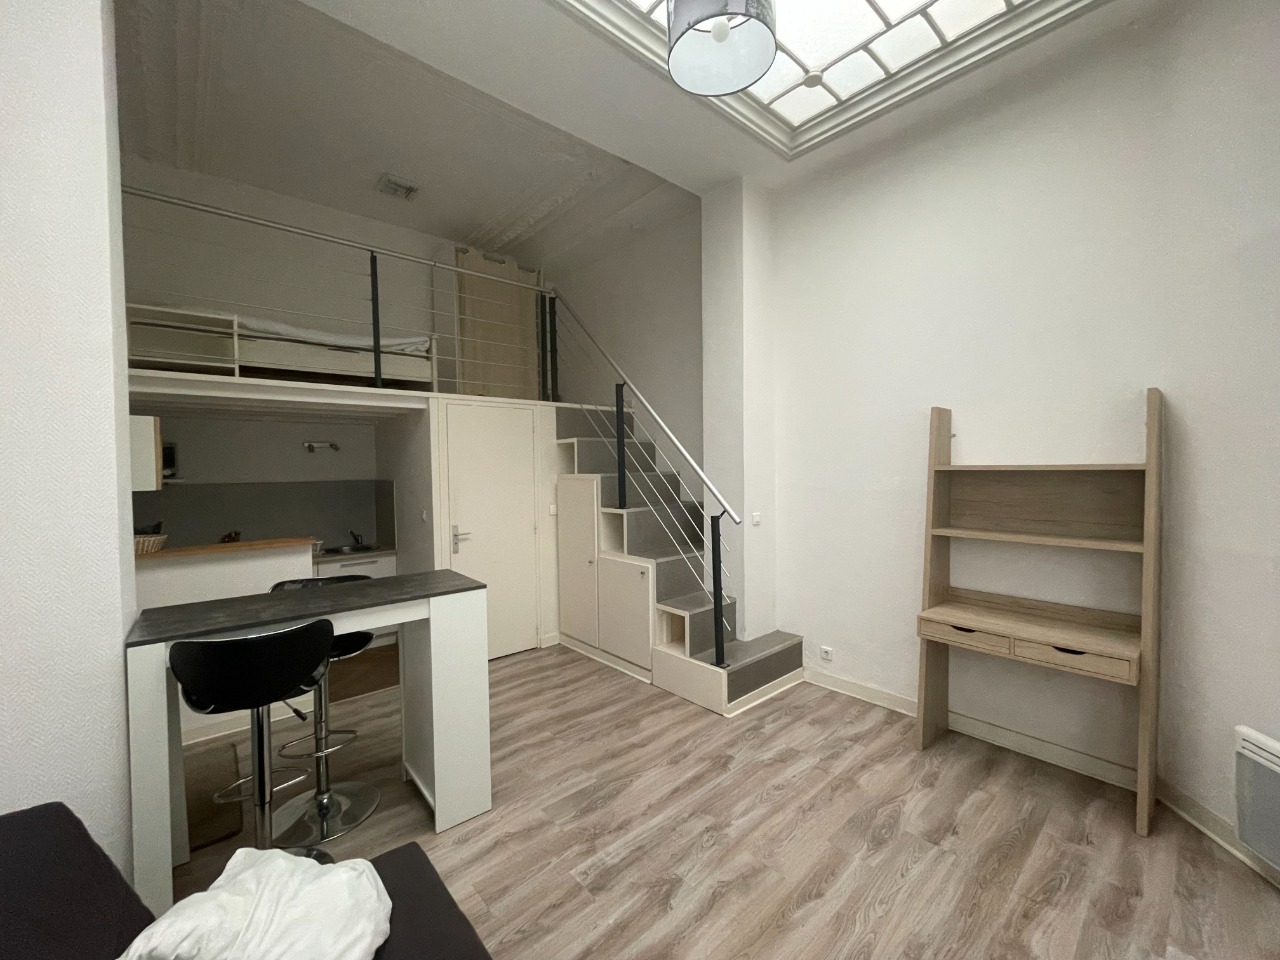 Grand studio   cour rue nationale Photo 1 - JLW Immobilier